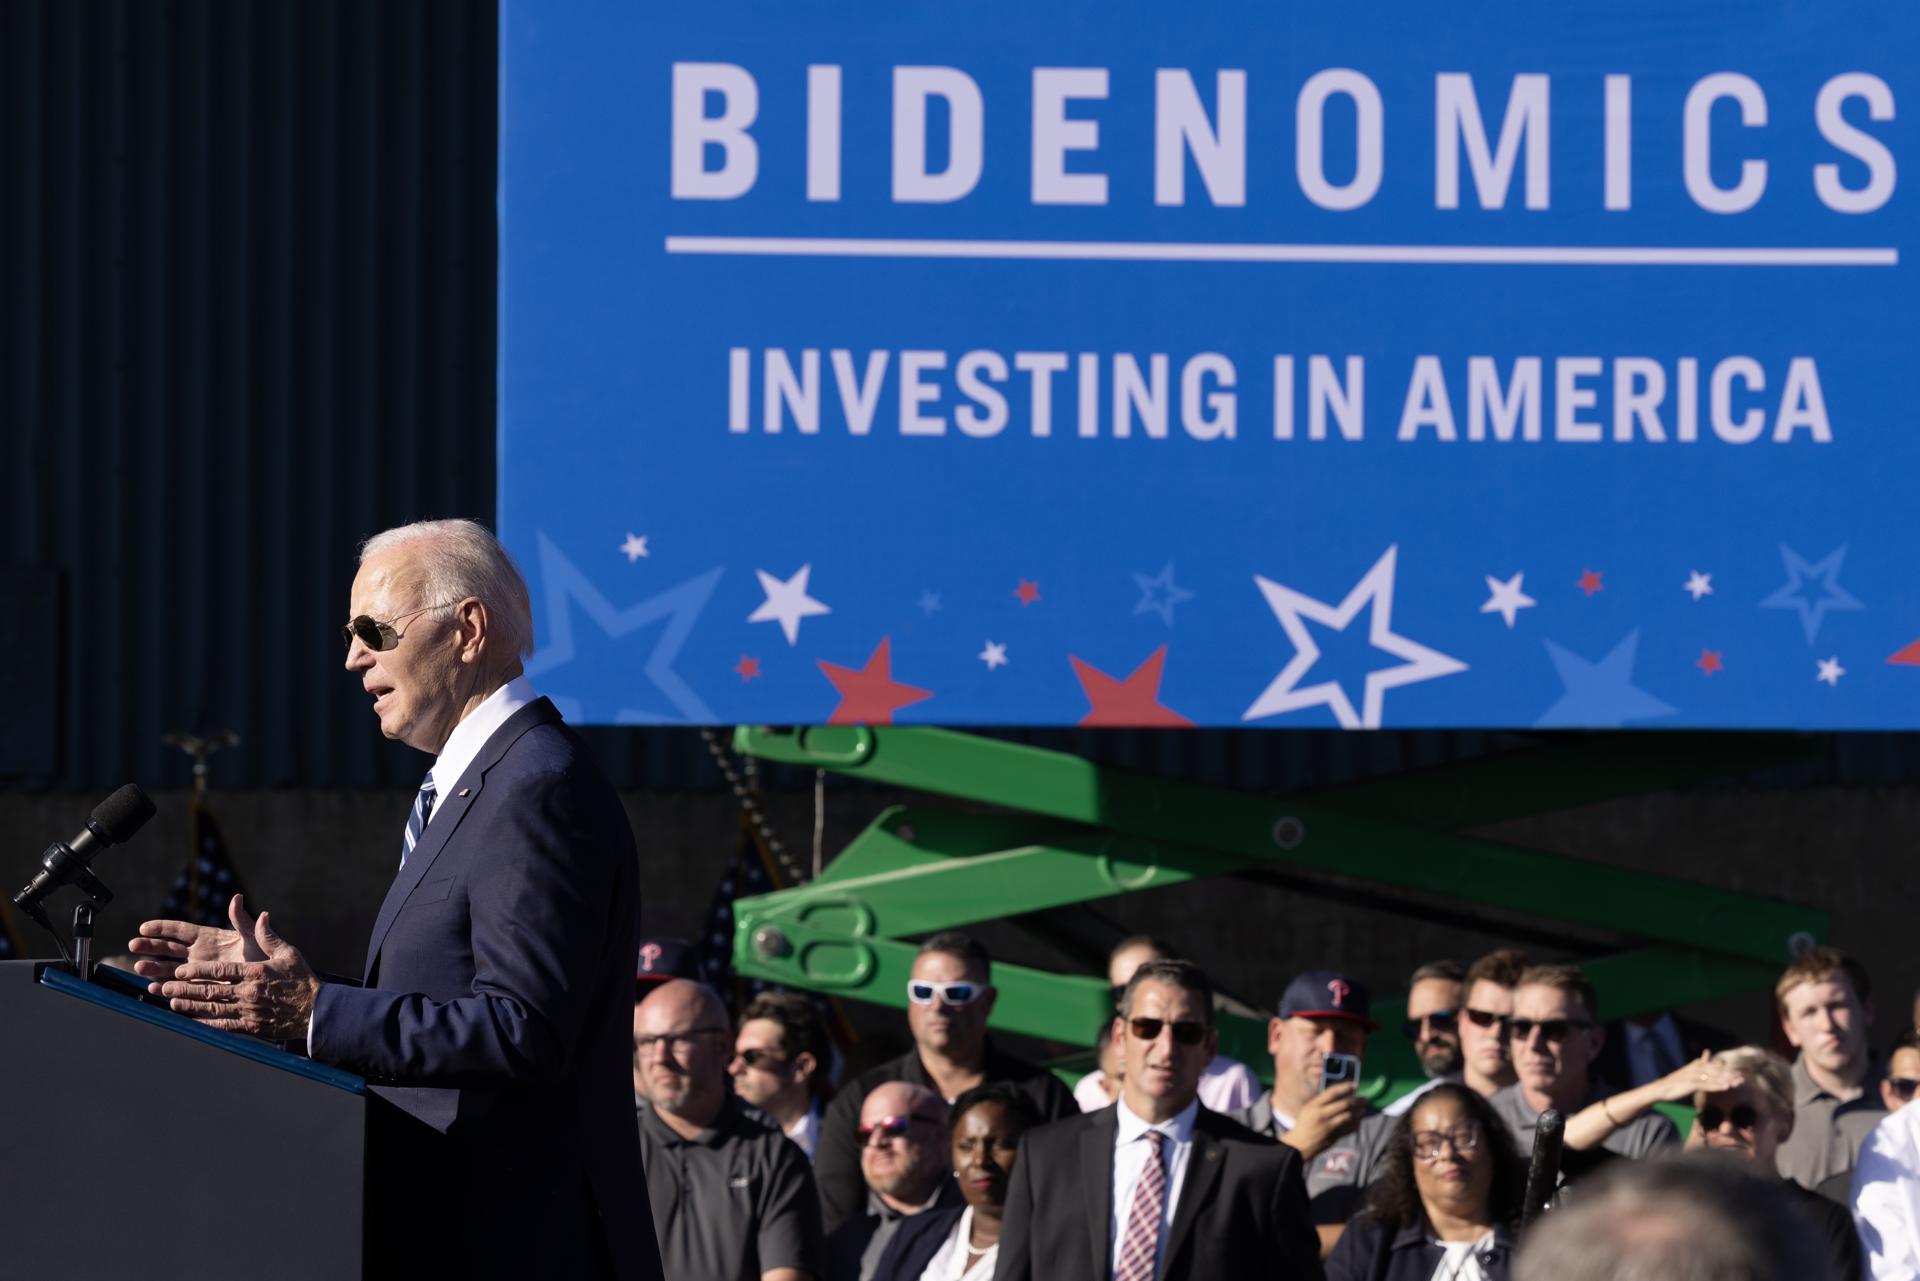 US President Joe Biden delivers remarks at the Tioga Marine Terminal in Philadelphia, Pennsylvania, USA, 13 October 2023. Biden discussed his economic policies known as 'Bidenomics' in relation to clean energy, union jobs and infrastructure. (Filadelfia) EFE/EPA/MICHAEL REYNOLDS